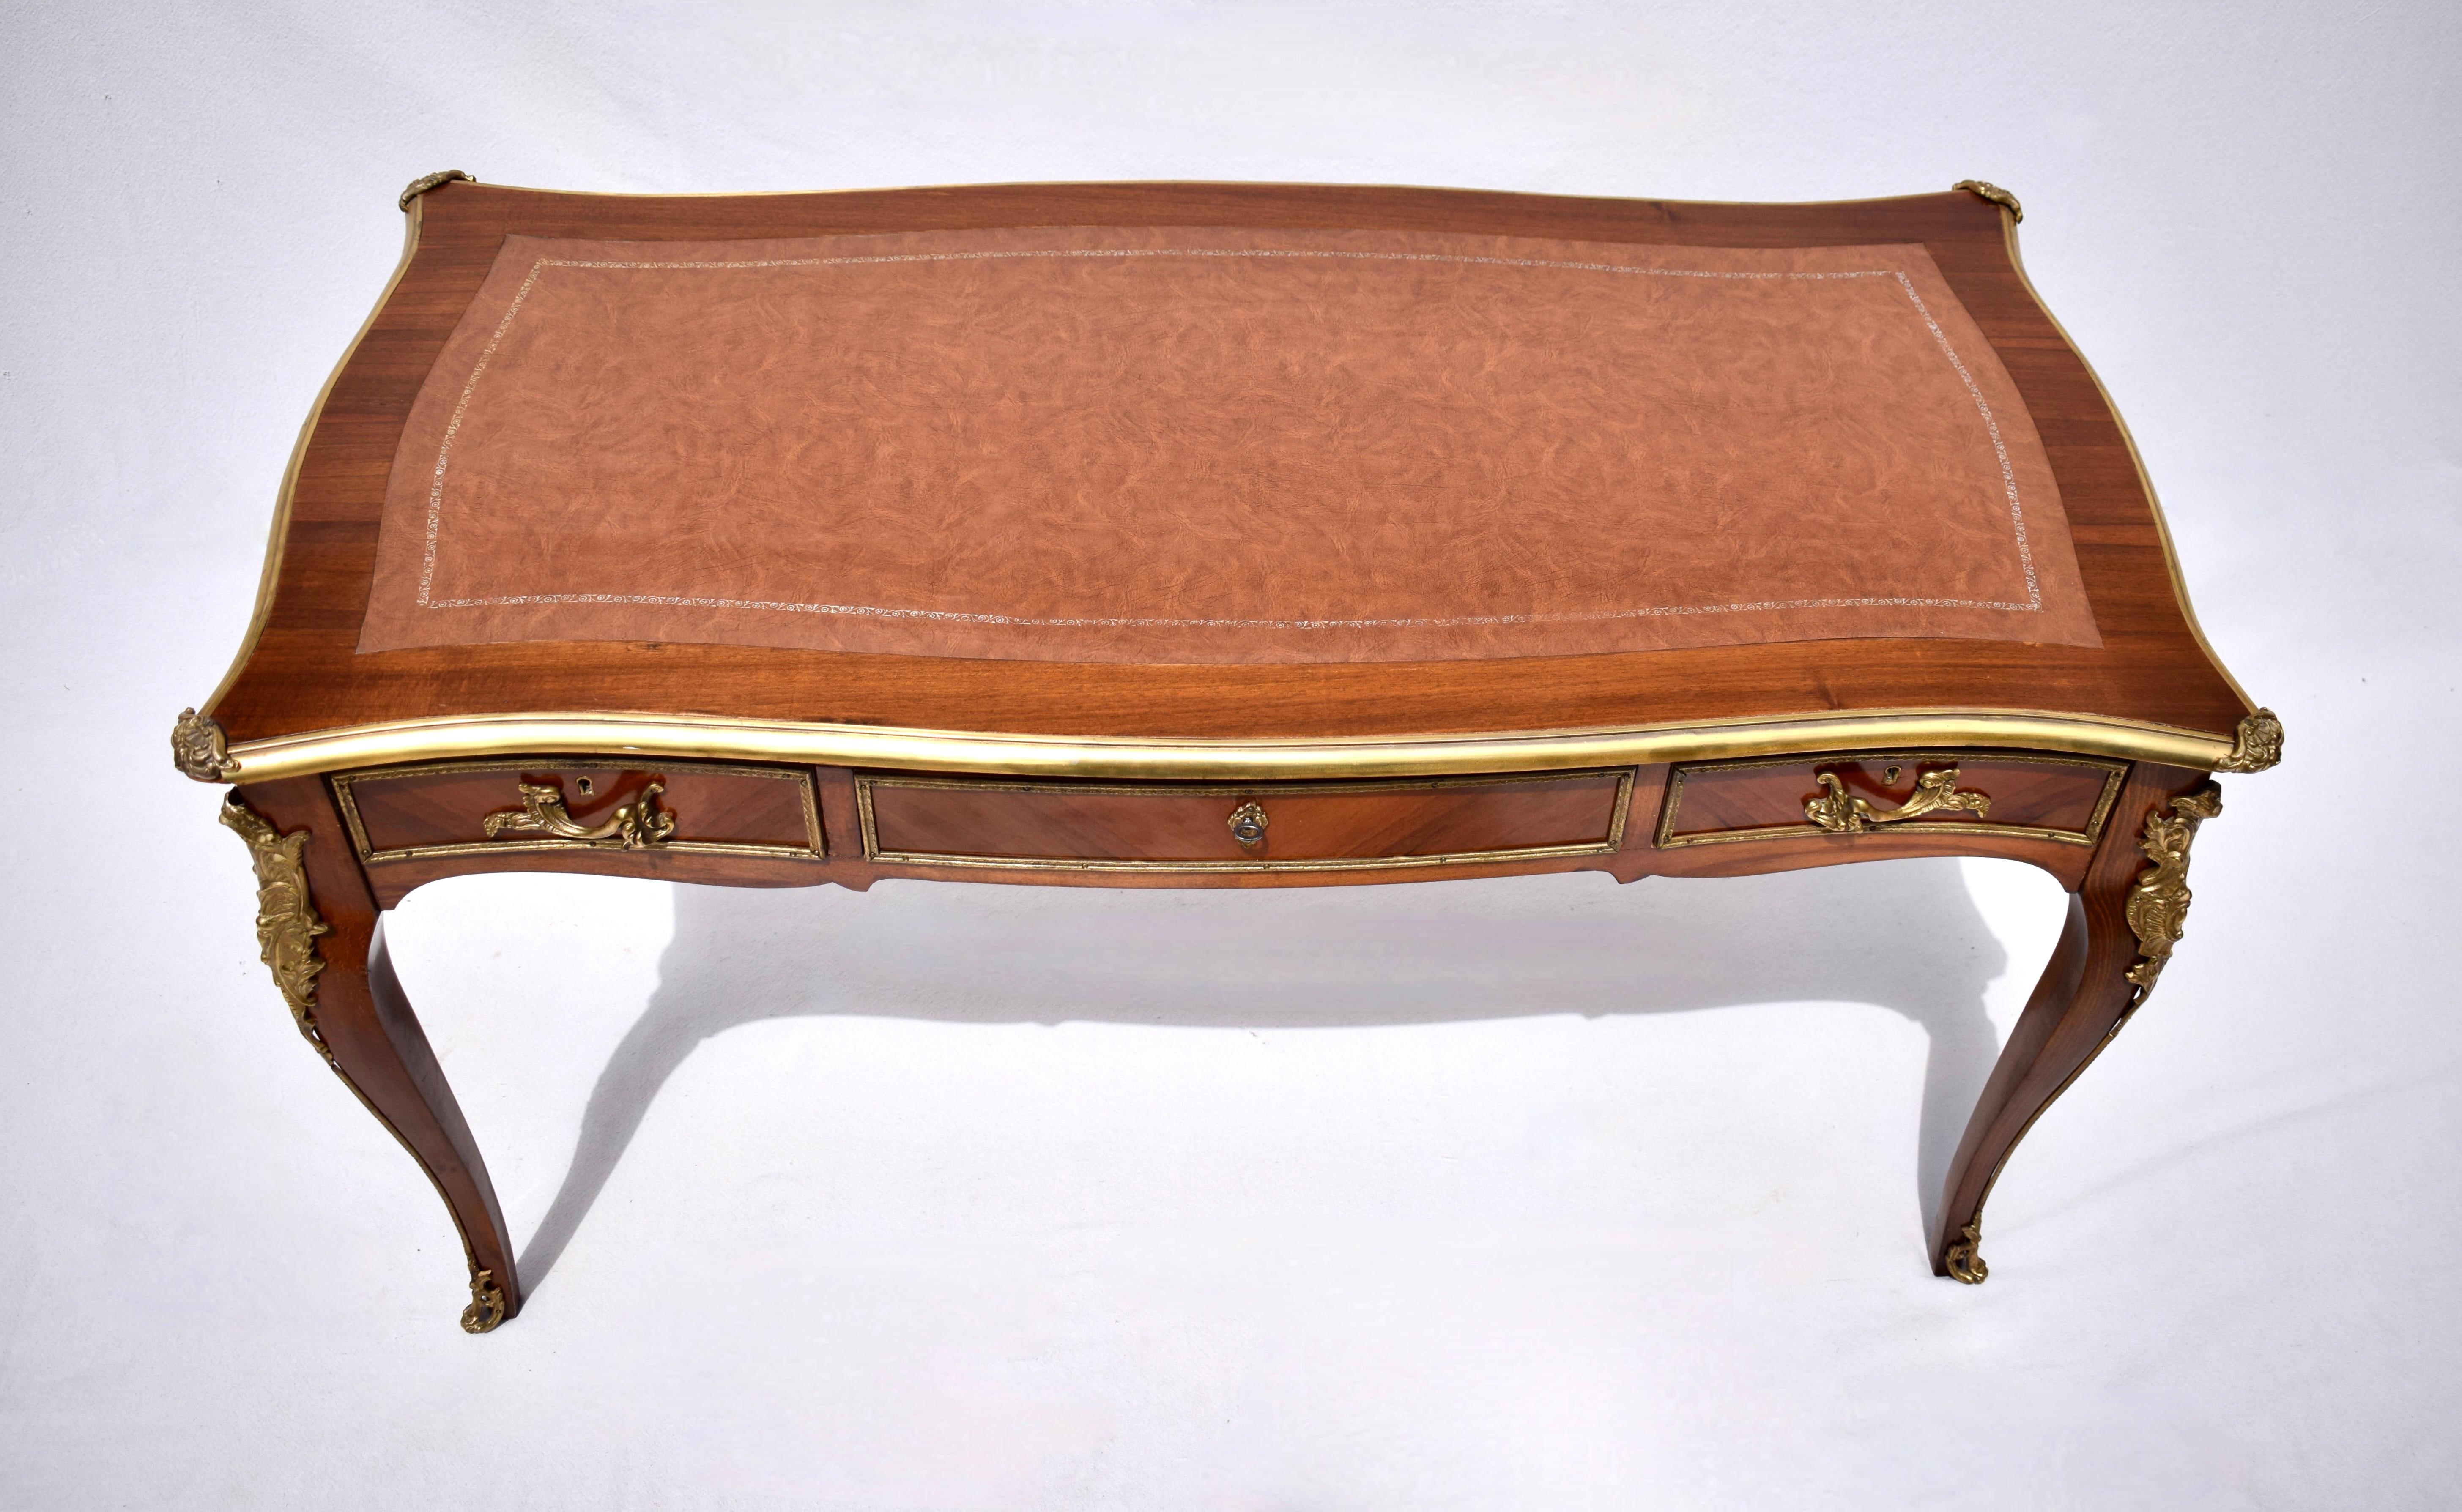 Exceptional 20th Century Kingwood Louis XV-style Bureau Plat featuring original gold-embossed leather top with highly detailed brass accents, trim & mounts. Finished on all sides this exquisite mid size desk boasts three drawers with working locks &